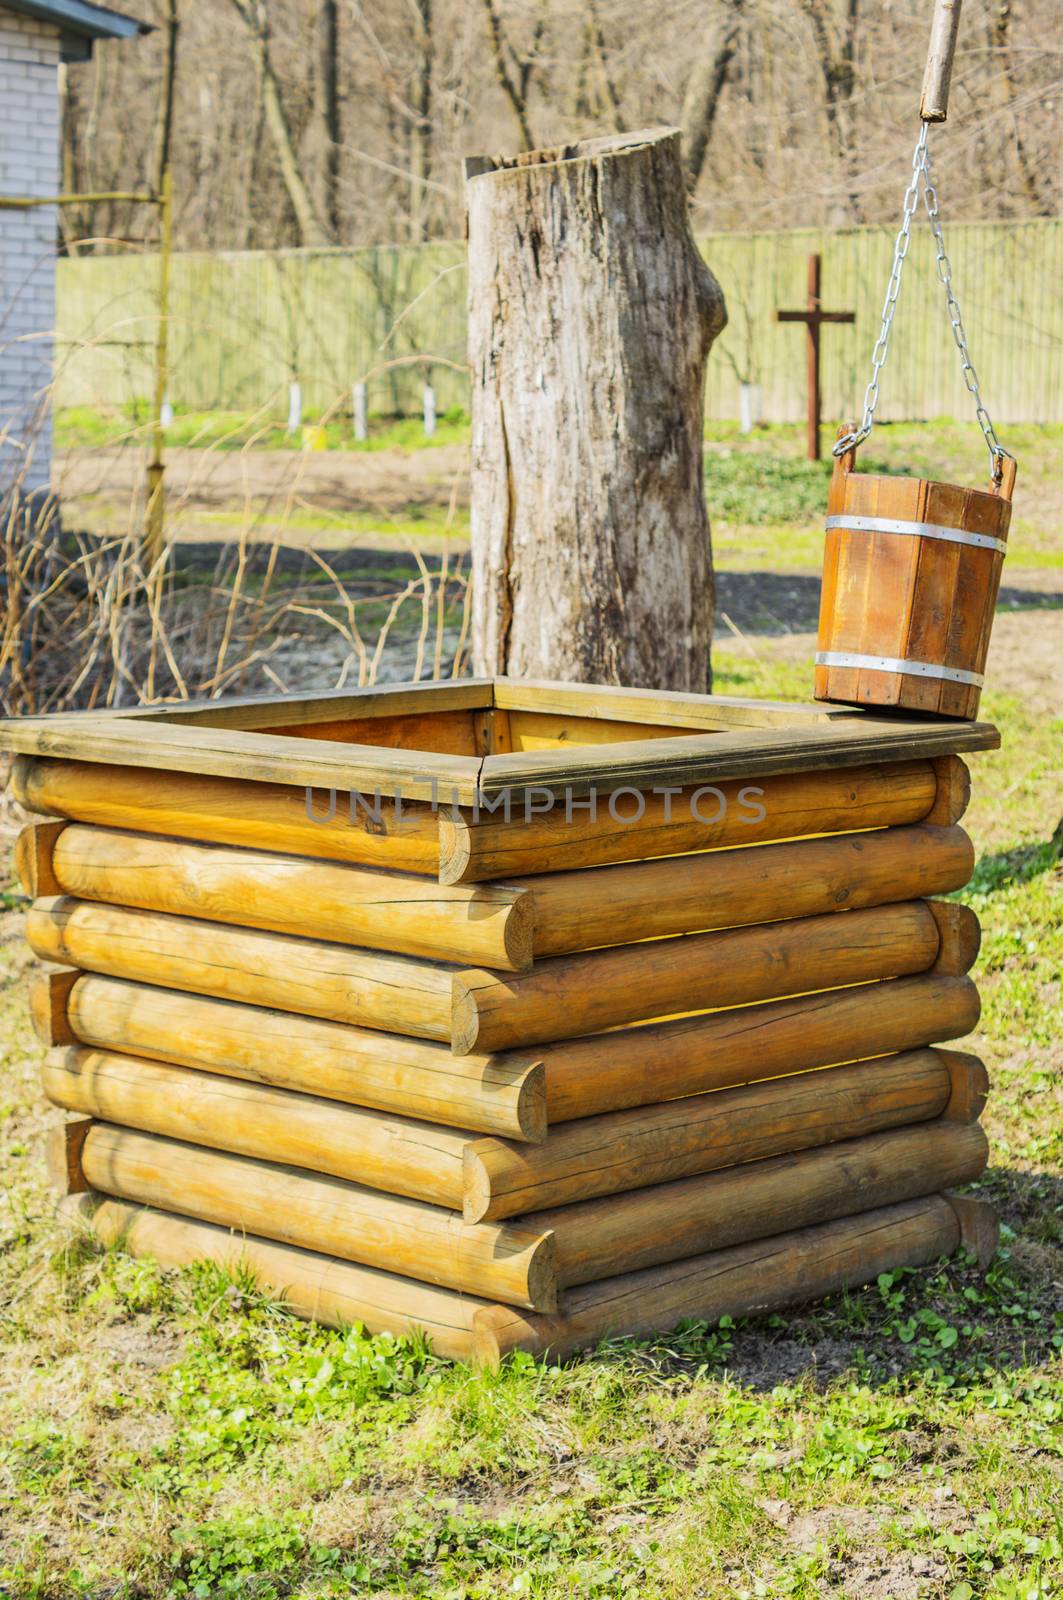 old wooden well water. For your commercial and editorial use. by serhii_lohvyniuk